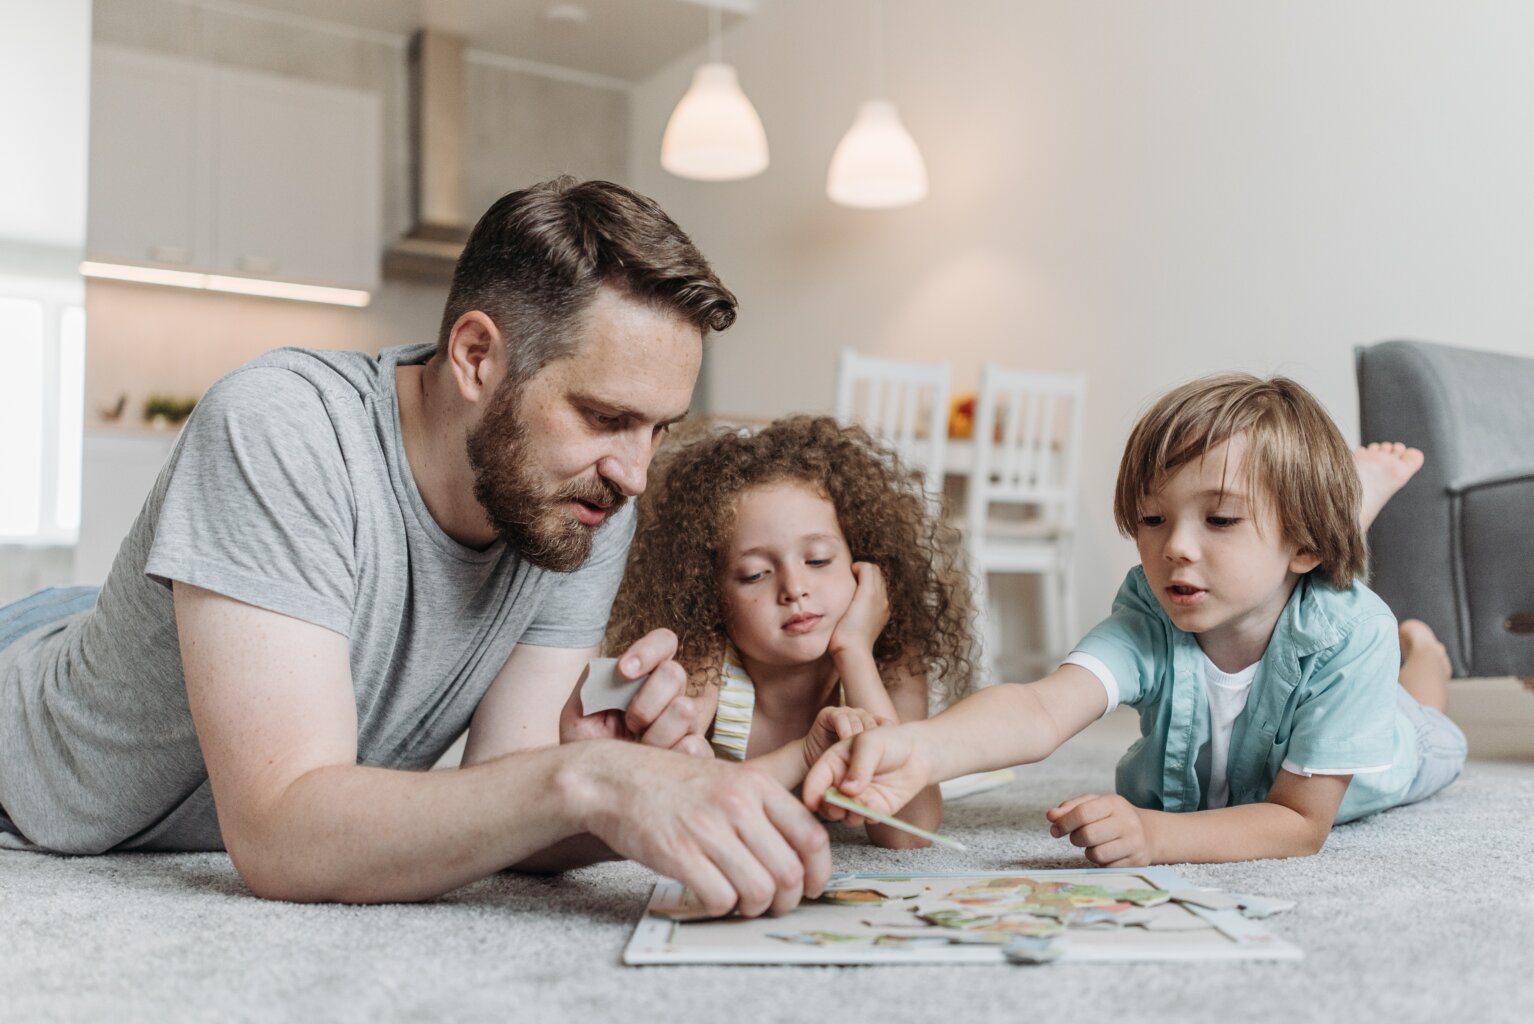 A father putting a puzzle together with his son and daughter to make learning fun.